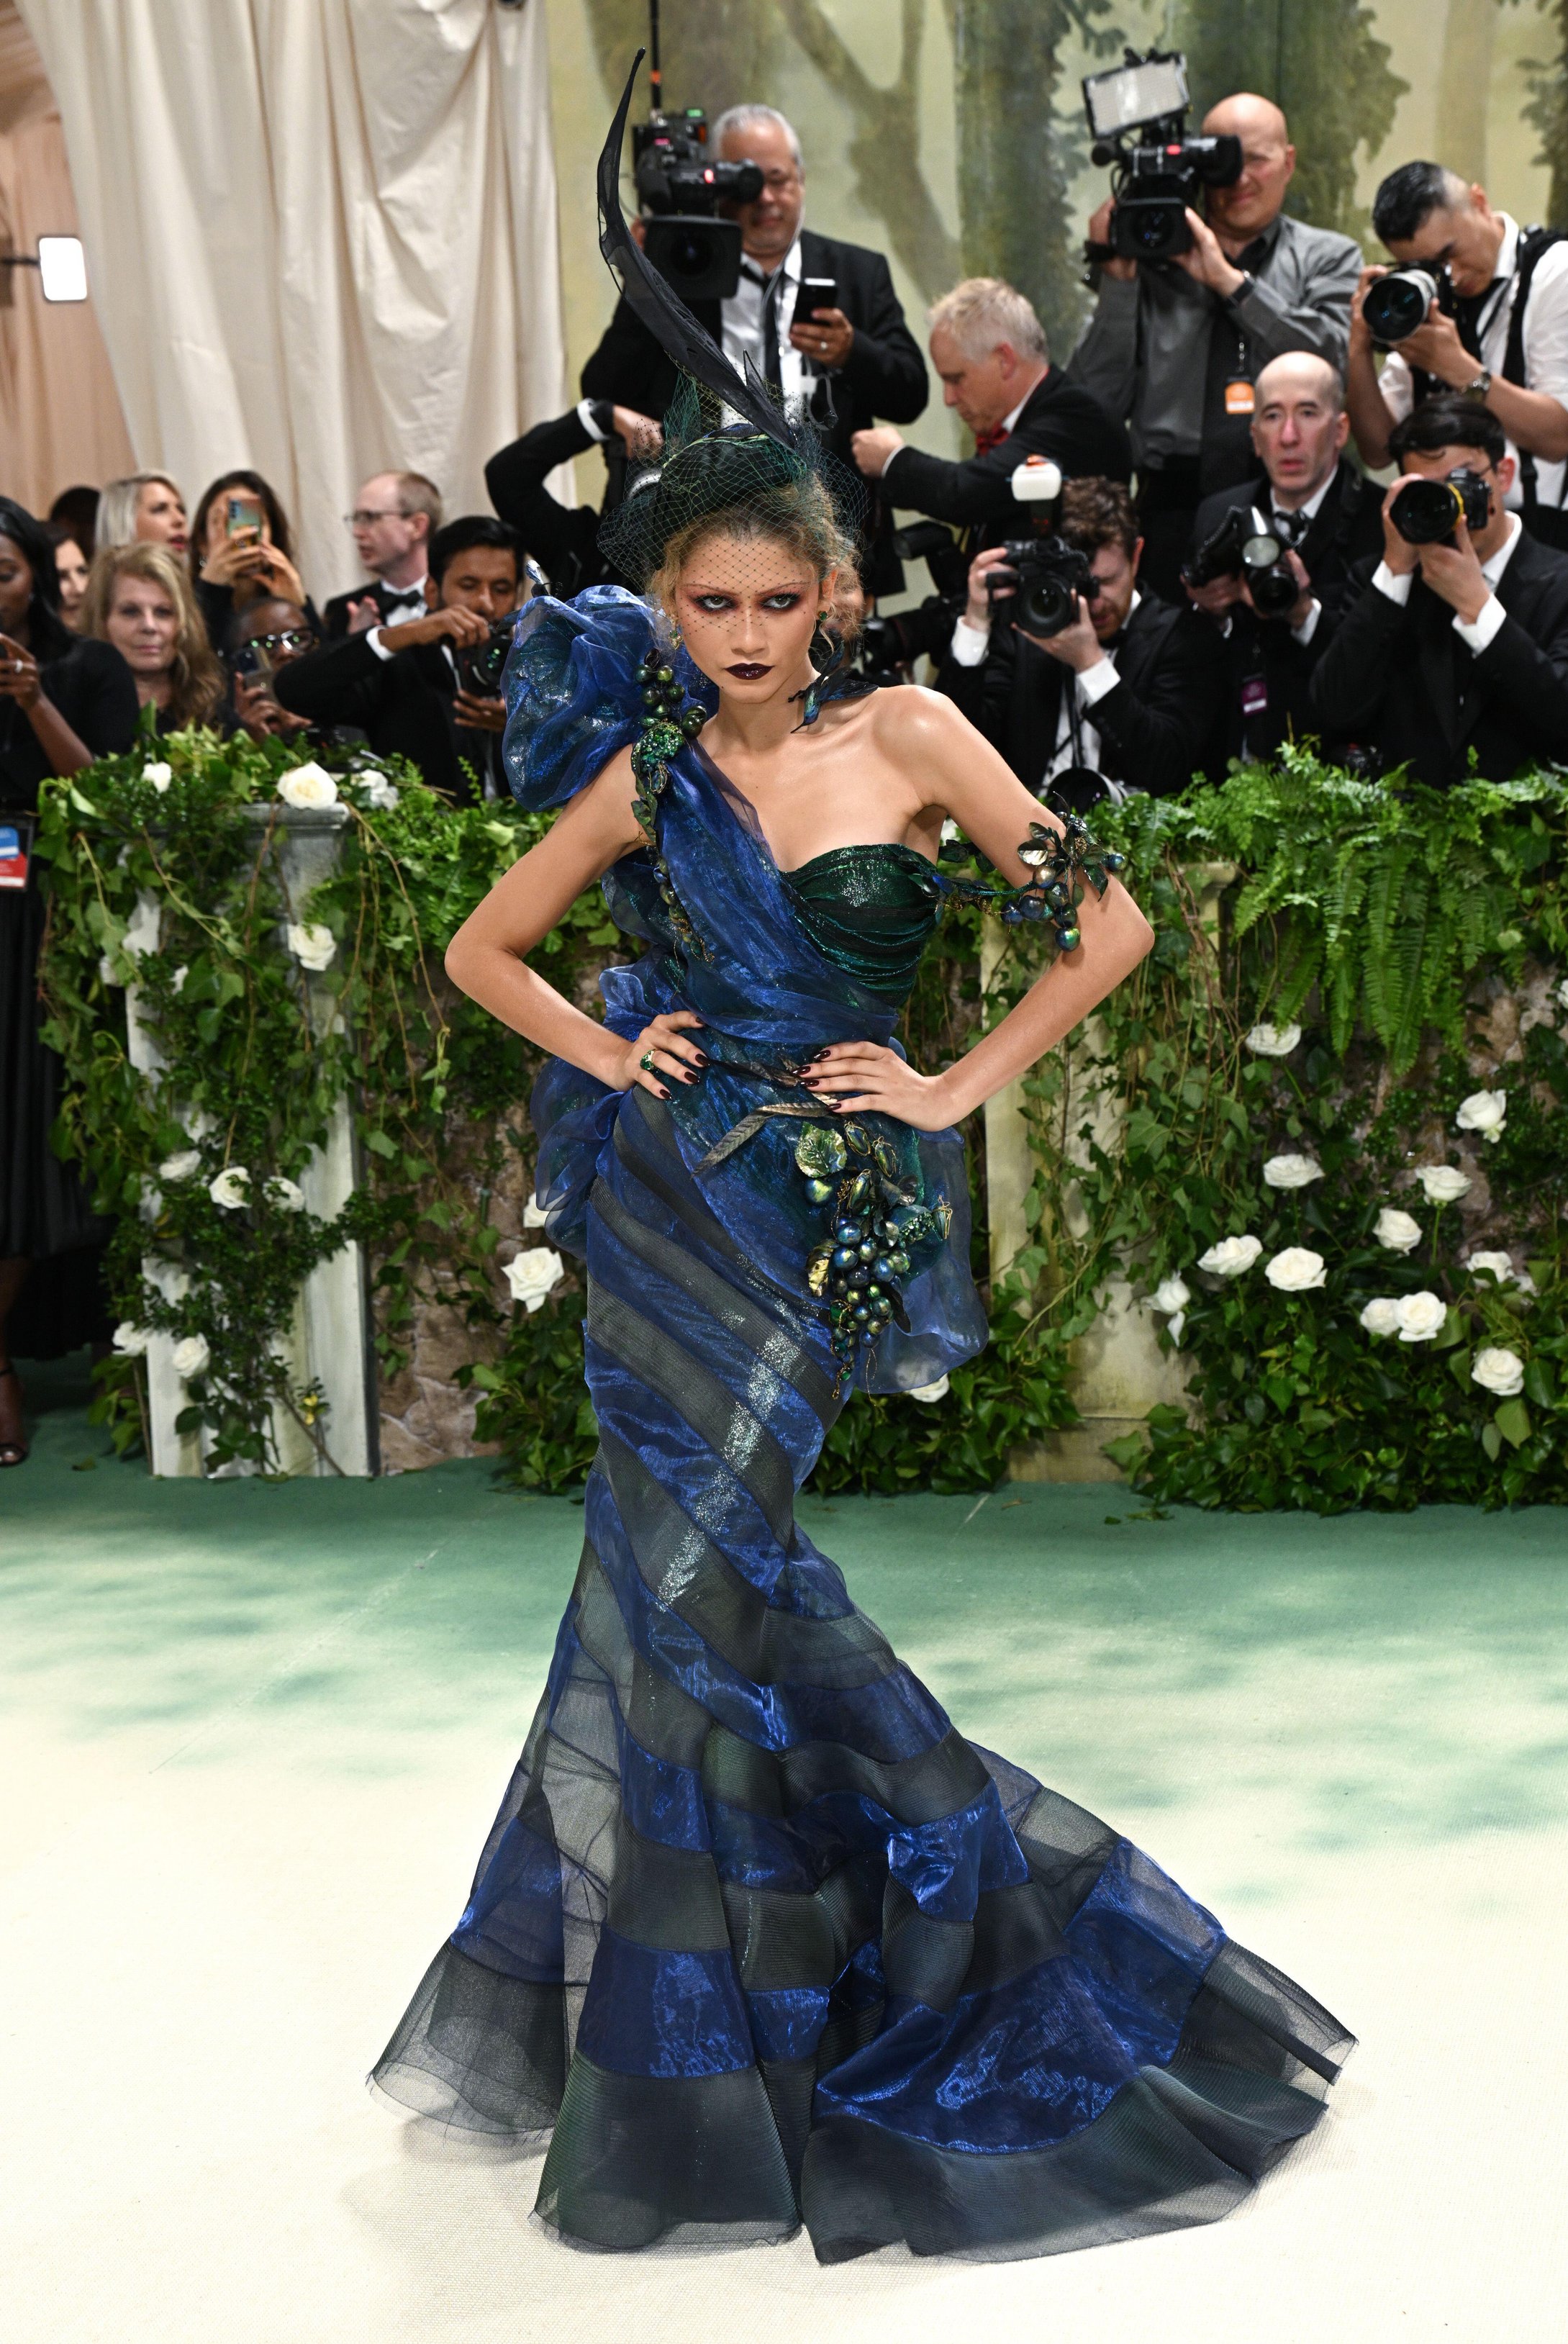 Zendaya became the first celebrity ever to wear two outfits at the event